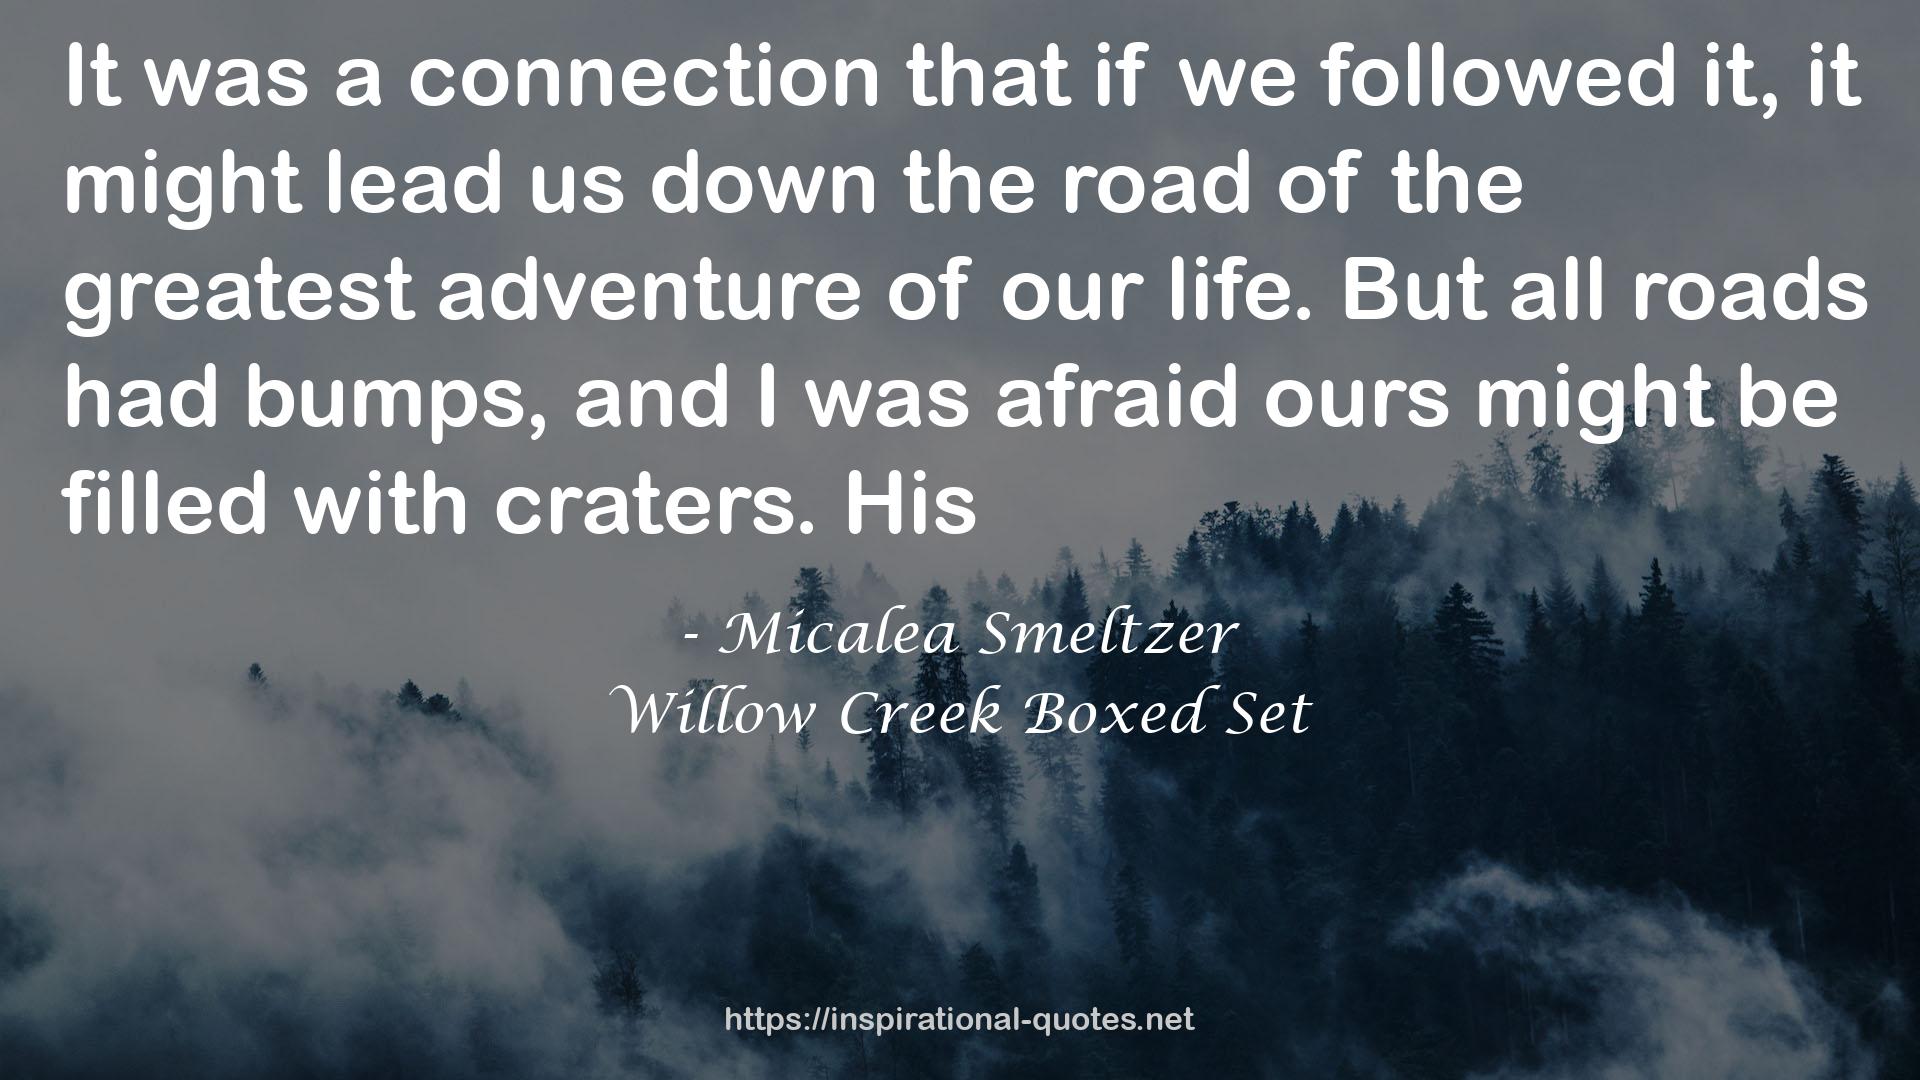 Willow Creek Boxed Set QUOTES